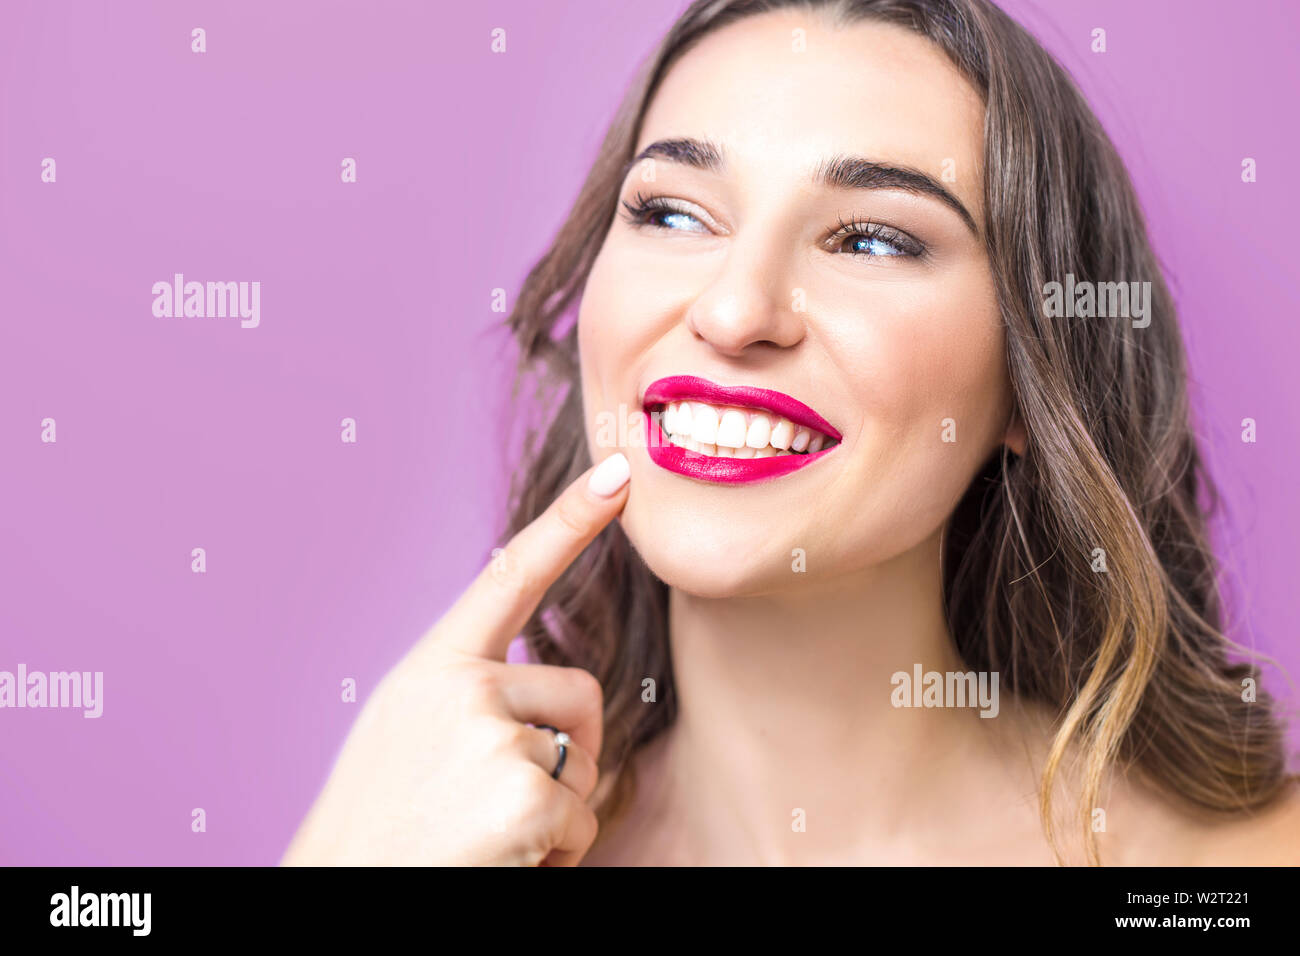 Dentistry concept. Beautiful young woman smiling, showing healthy white teeth, red lipstick. Stock Photo